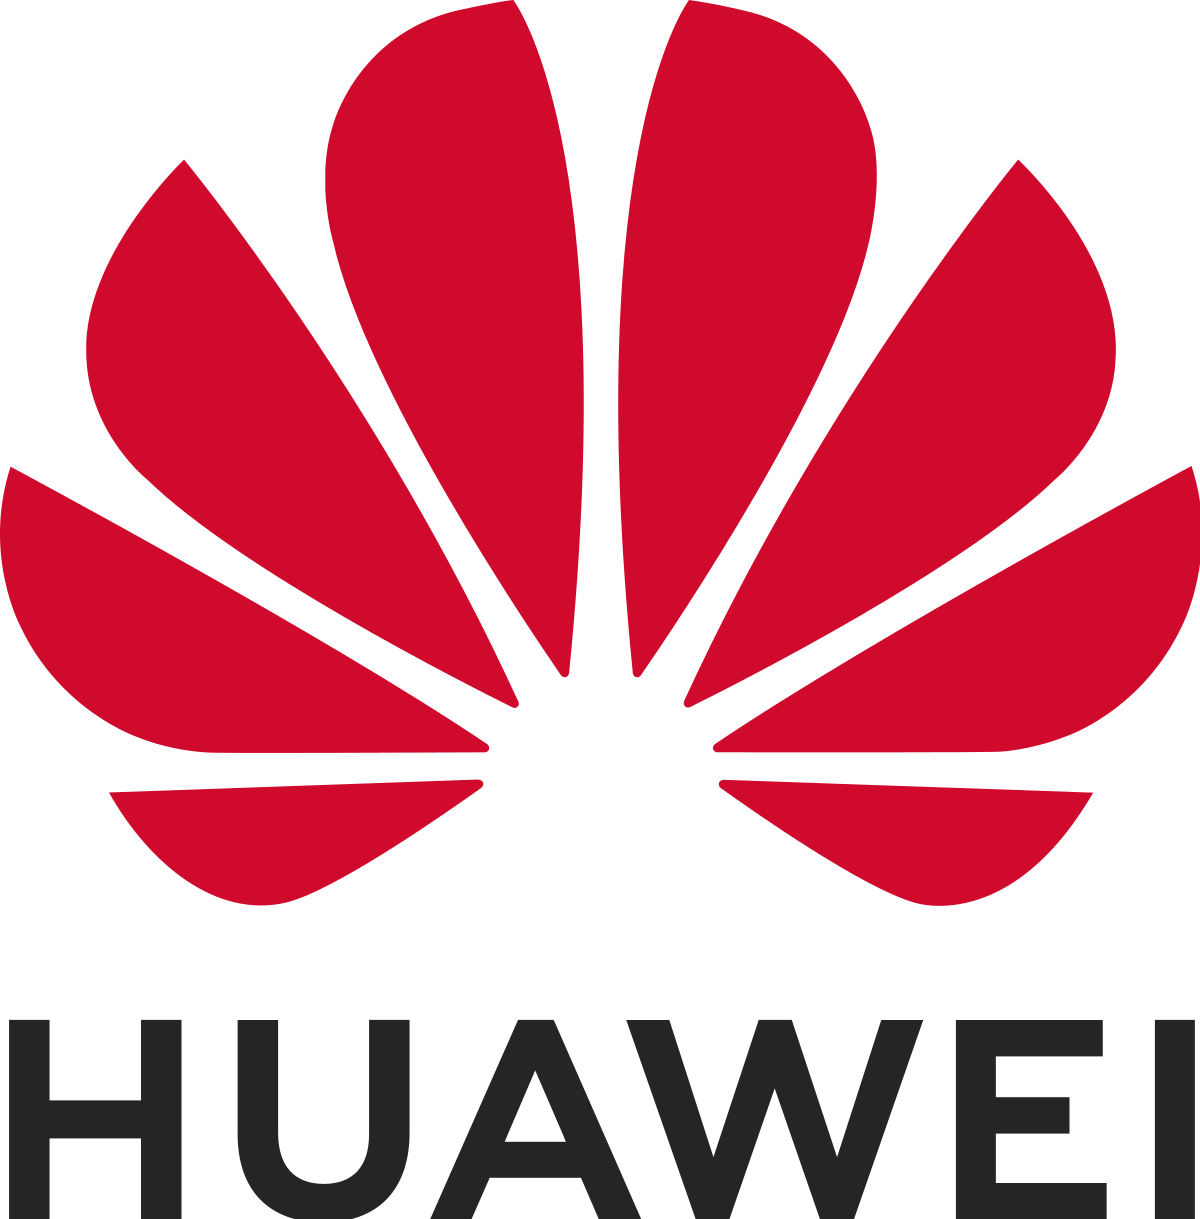 Huawei's Ryan Ding: Green ICT for New Value